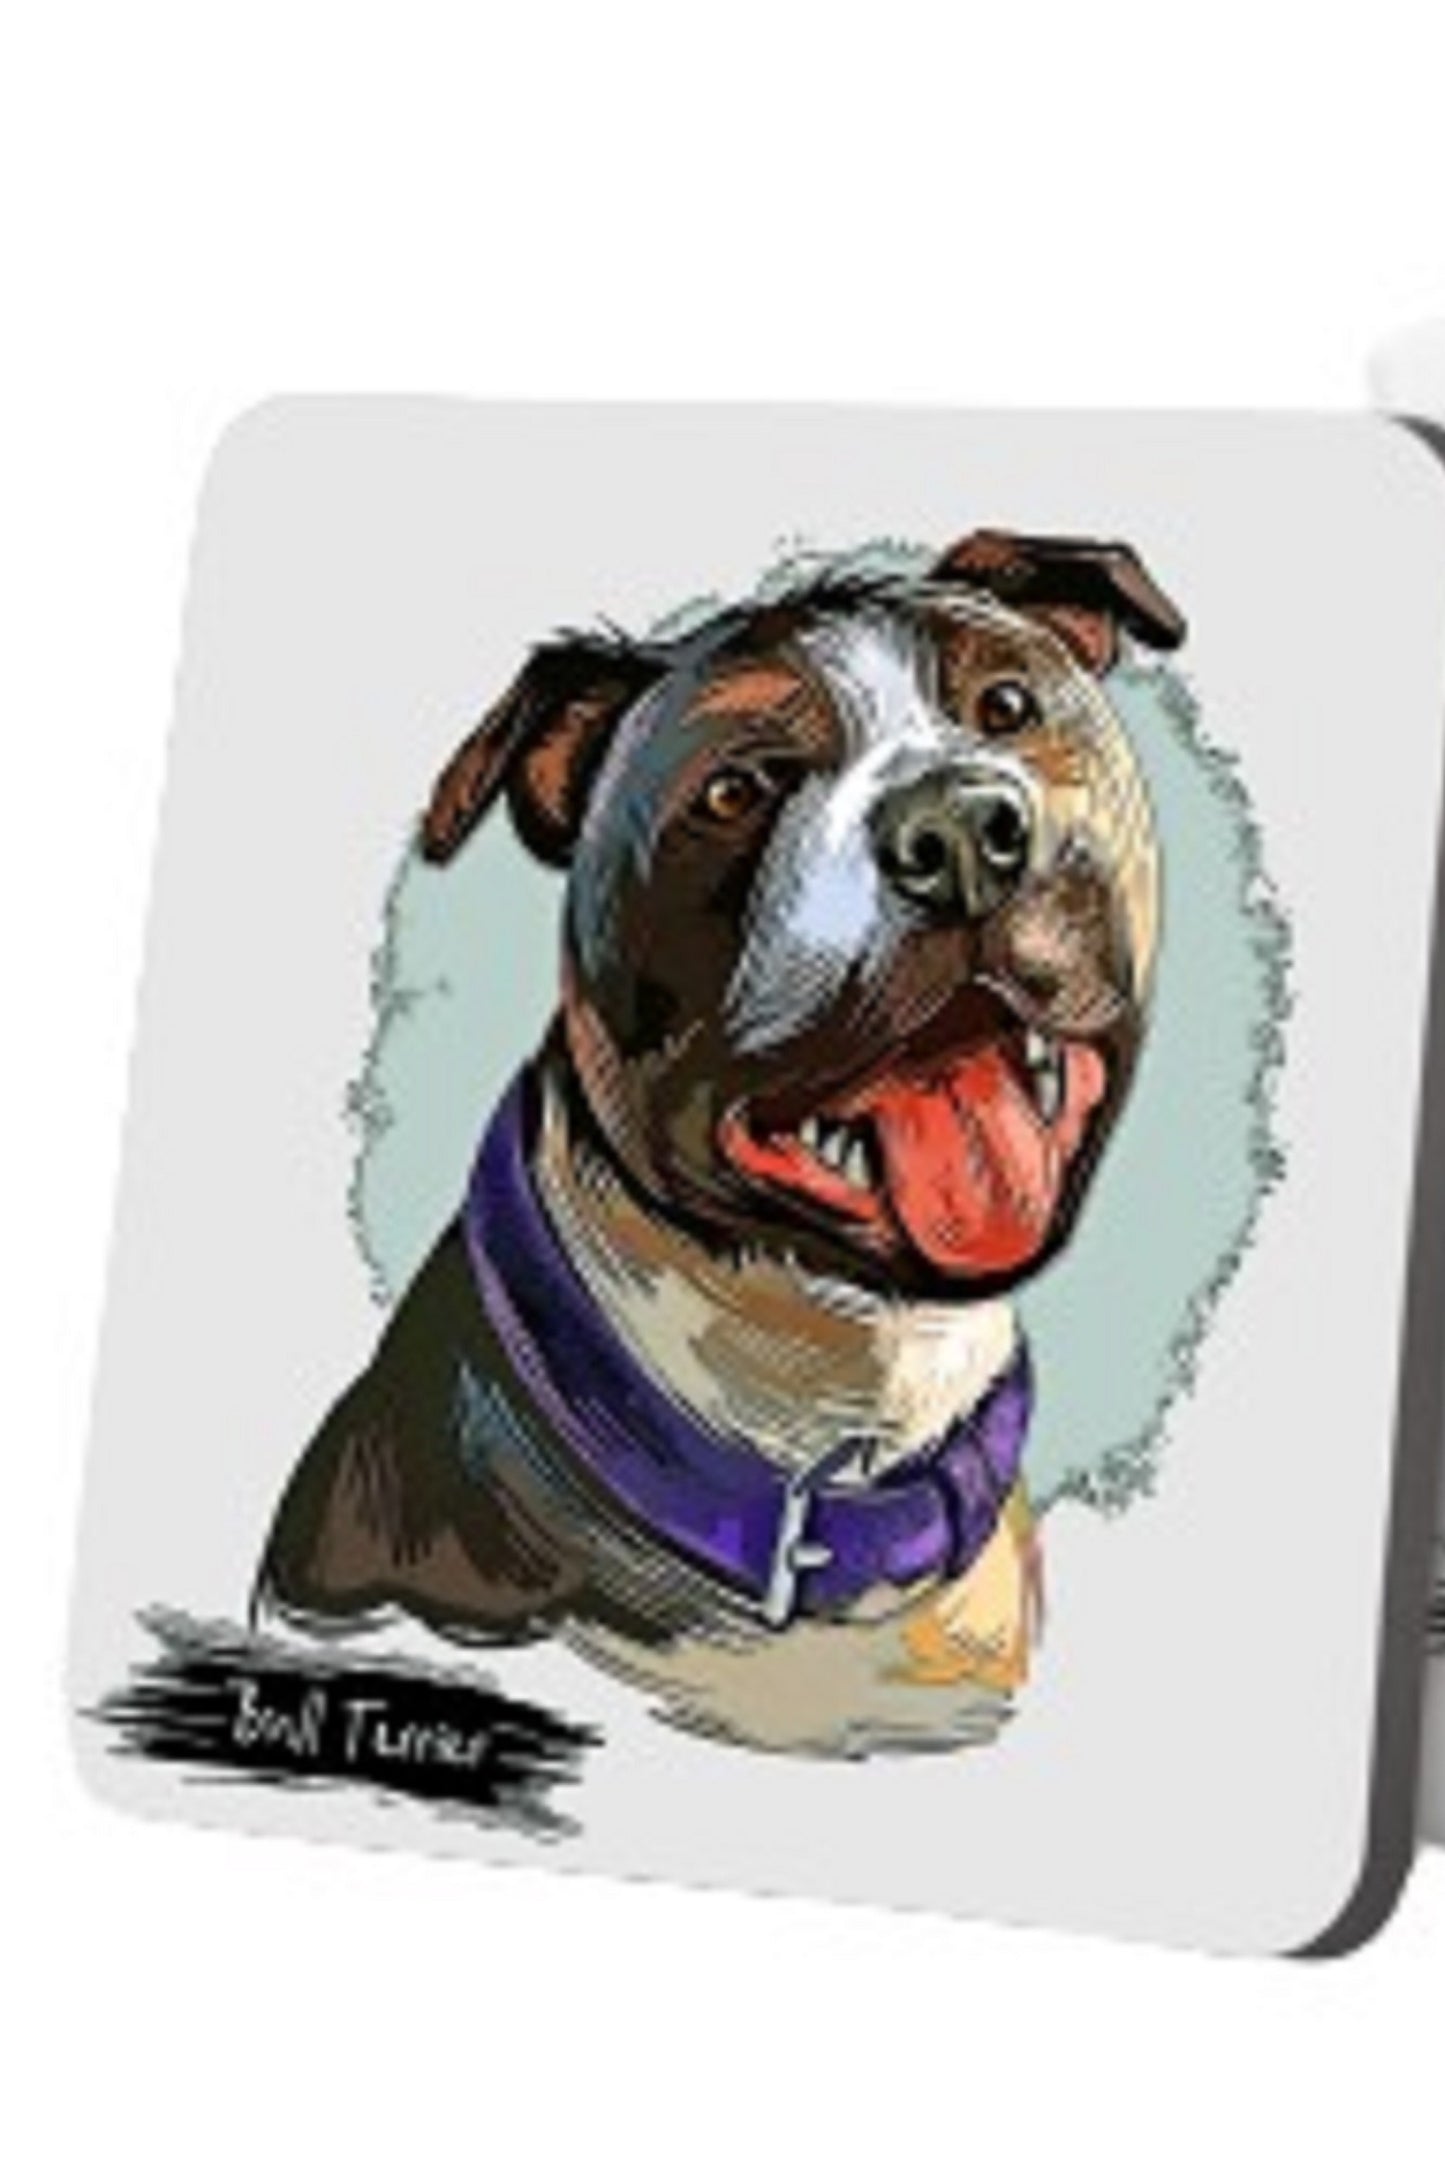 Coaster Only Staffy Dog Head Mug and Coaster by Free Spirit Accessories sold by Free Spirit Accessories